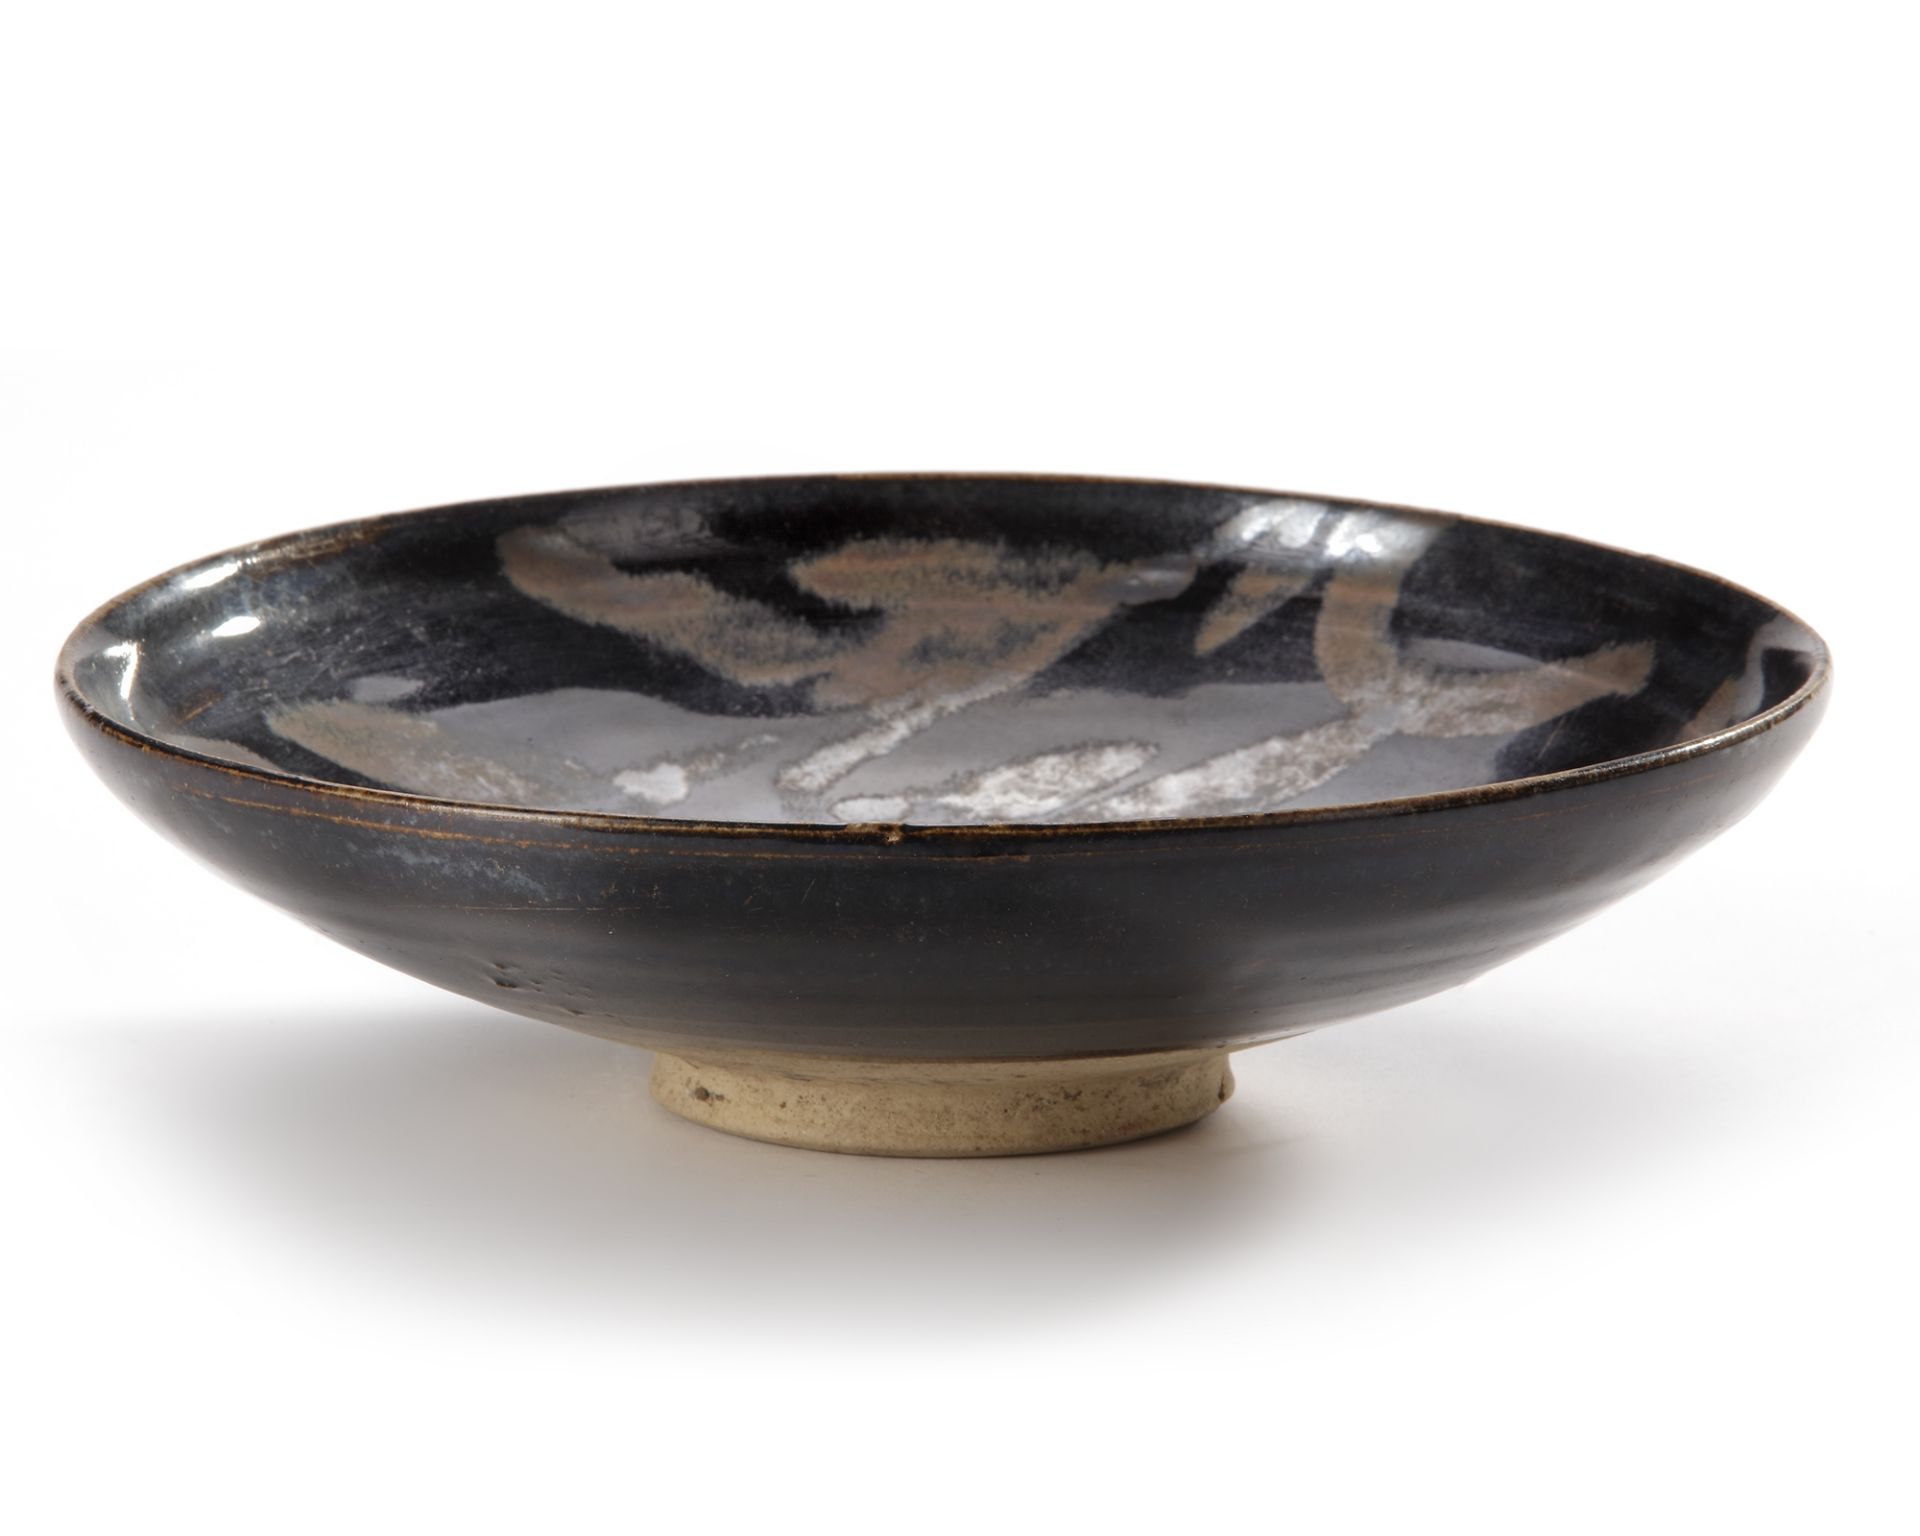 A CHINESE HENAN RUSSET PAINTED BLACK GLAZED BOWL, JIN DYNASTY (1115-1234) - Image 2 of 5